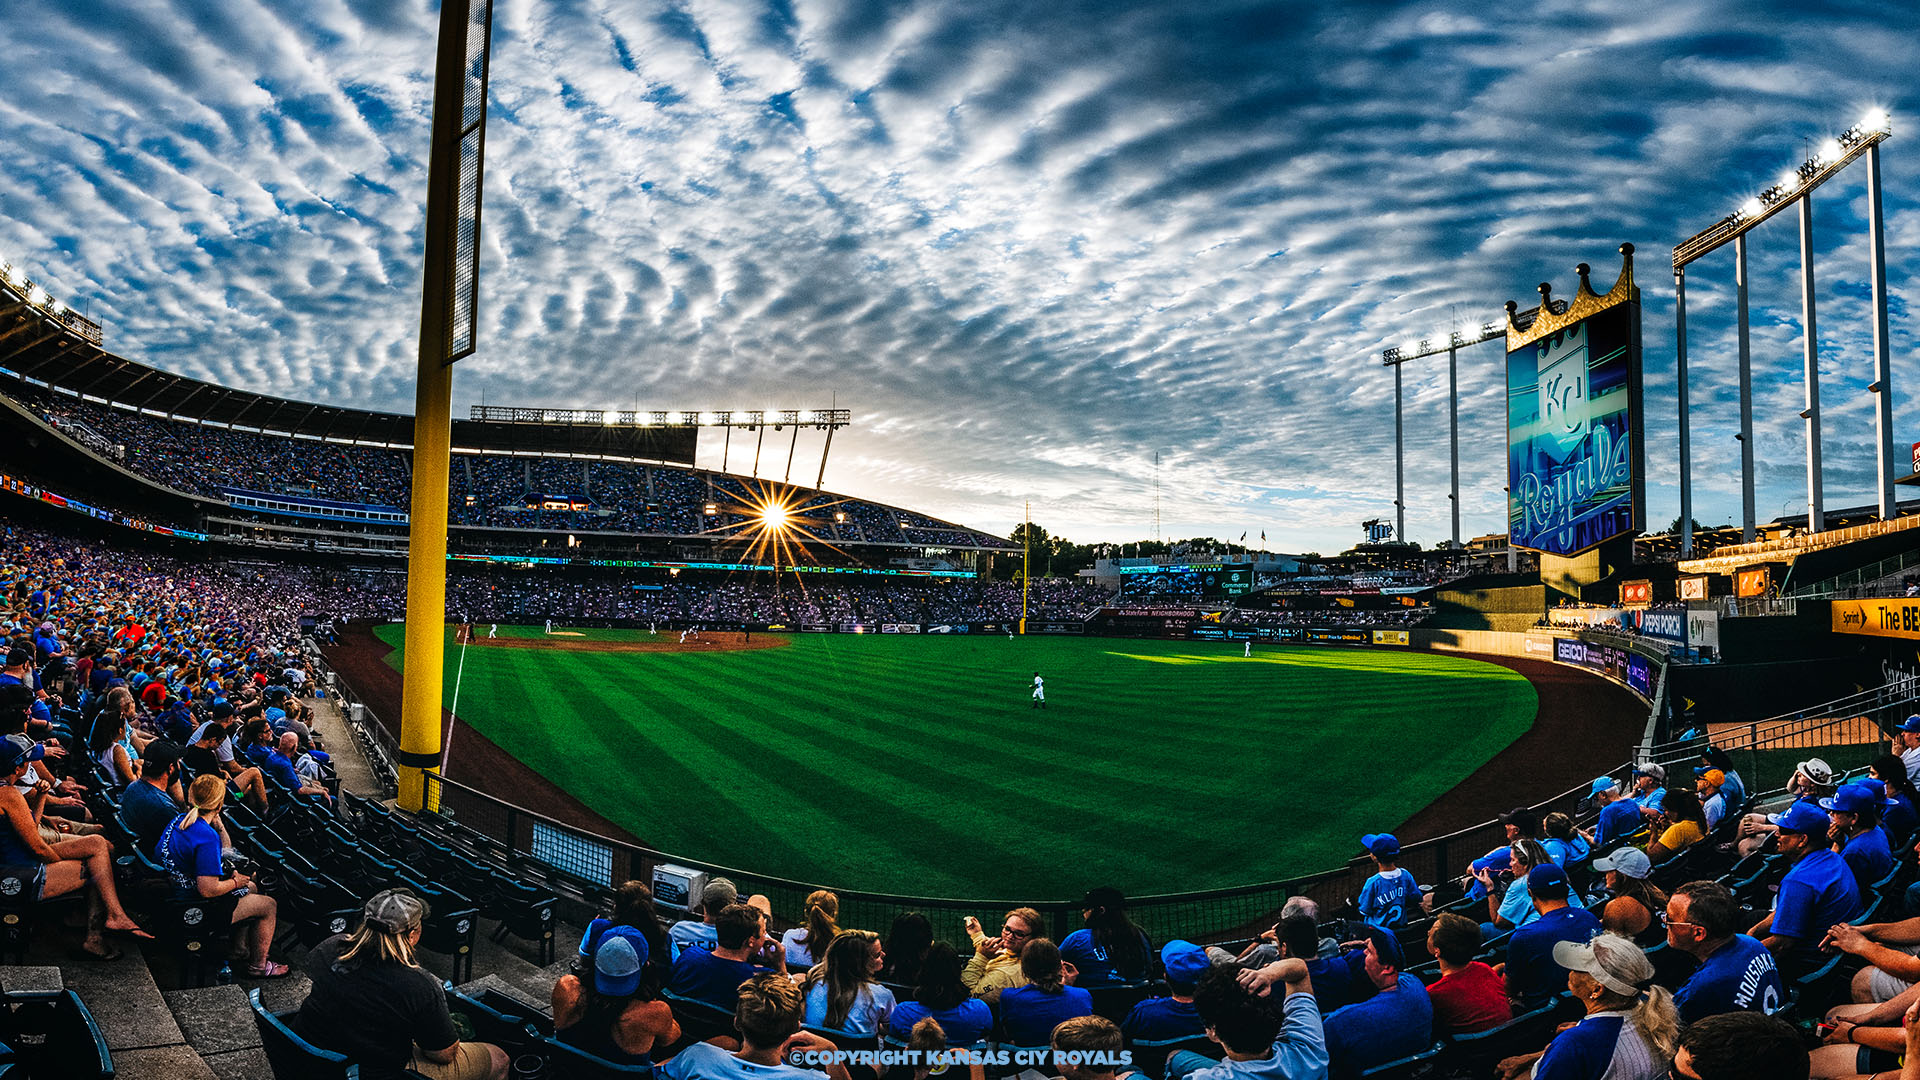 Kansas City Royals your coworkers that you're #AlwaysRoyal in your next virtual meeting with these background!